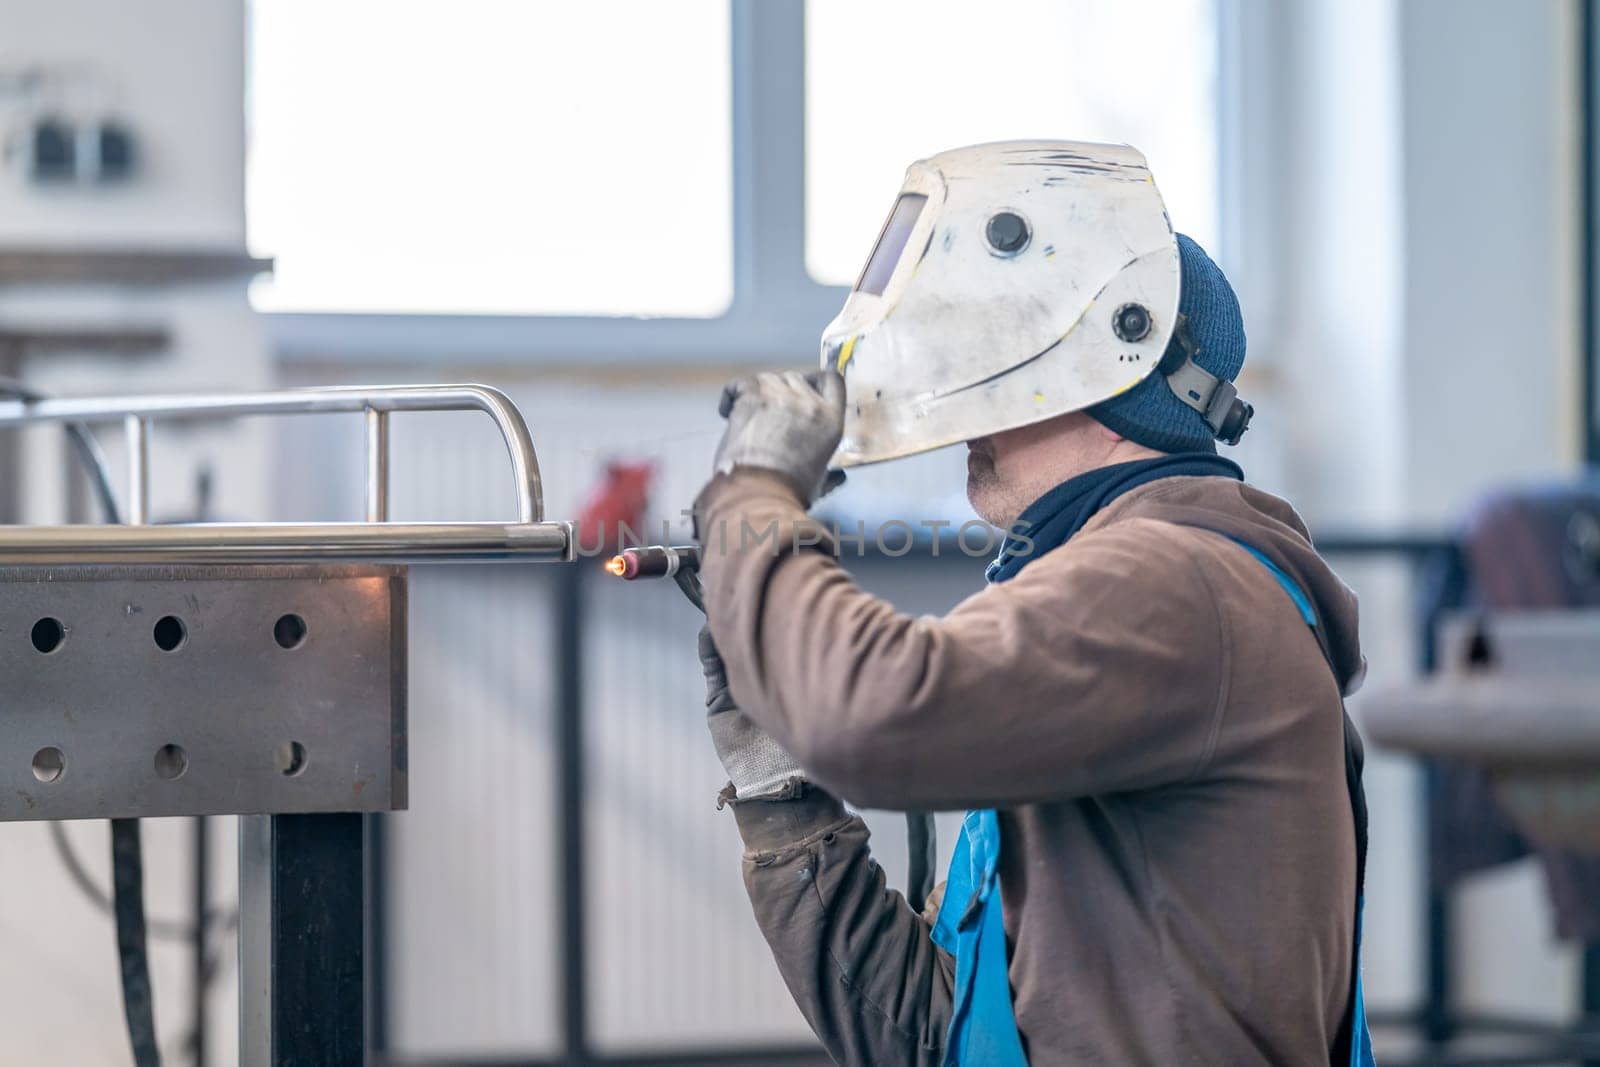 A worker in personal protective equipment, including a helmet and workwear, is welding metal using a gaspowered machine inside a building